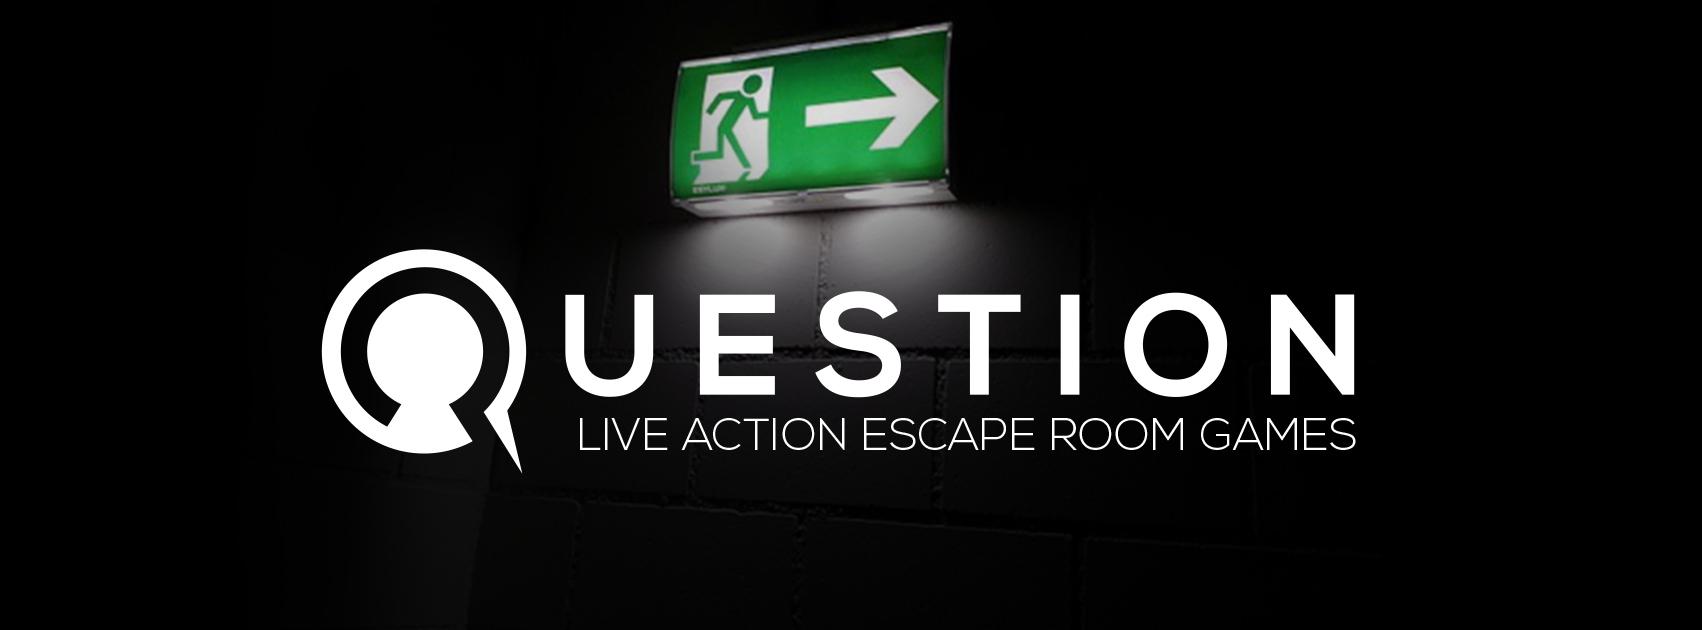 Cover image of this place QUESTION Escape Room Games